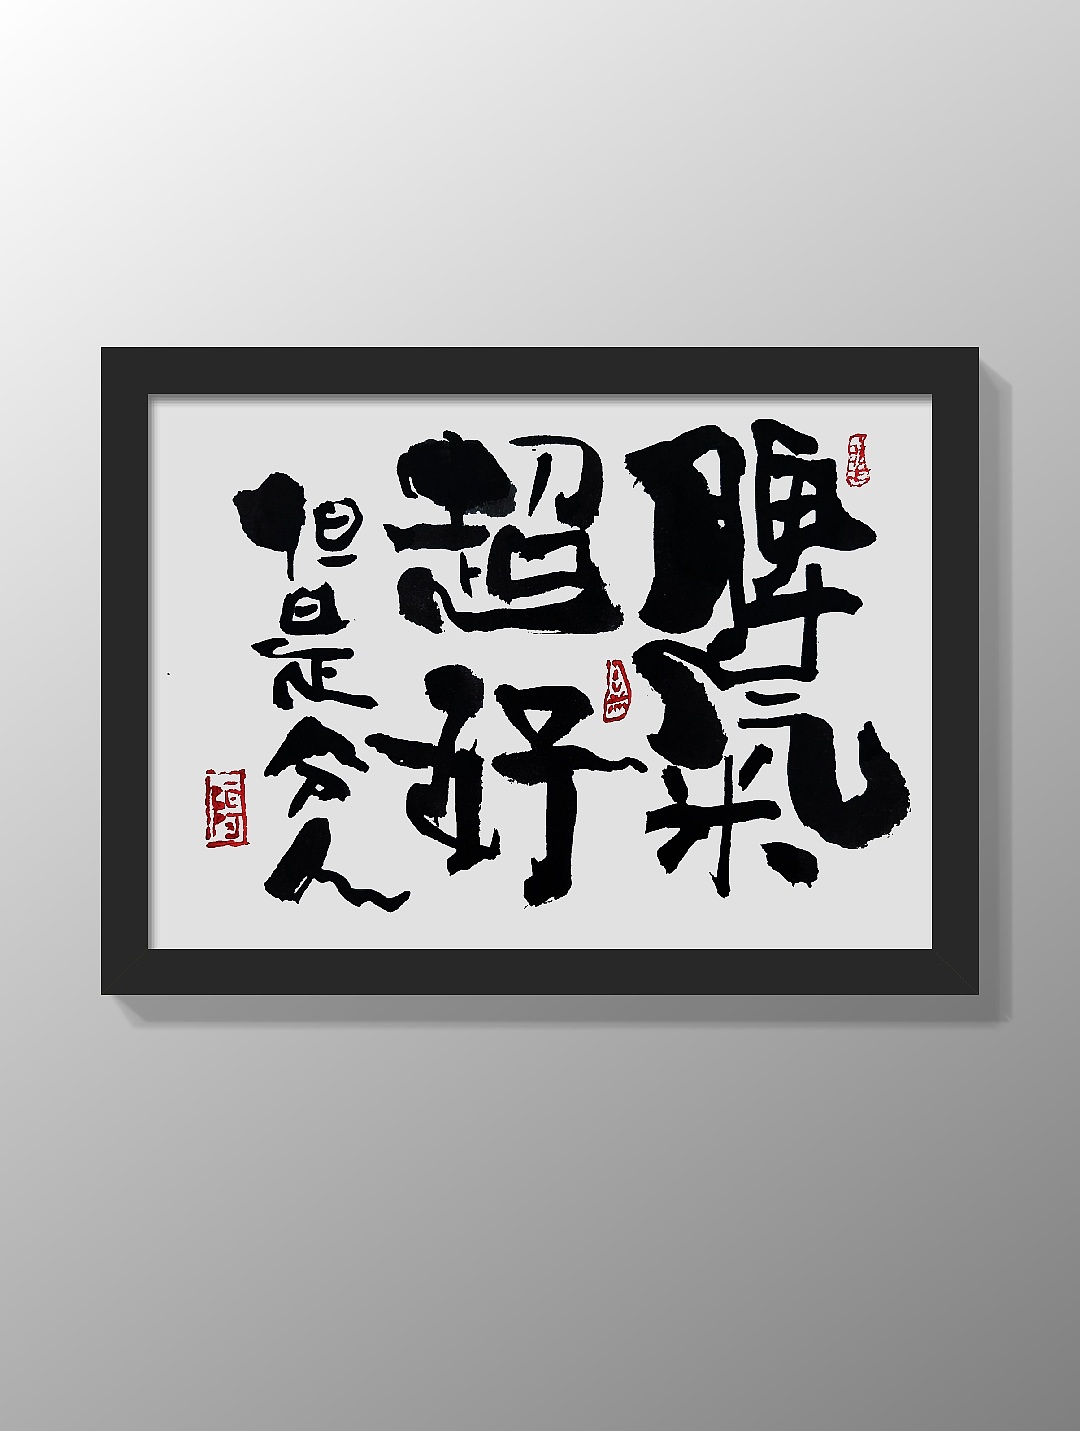 It is suitable for writing brush font design hung on the wall for decoration.